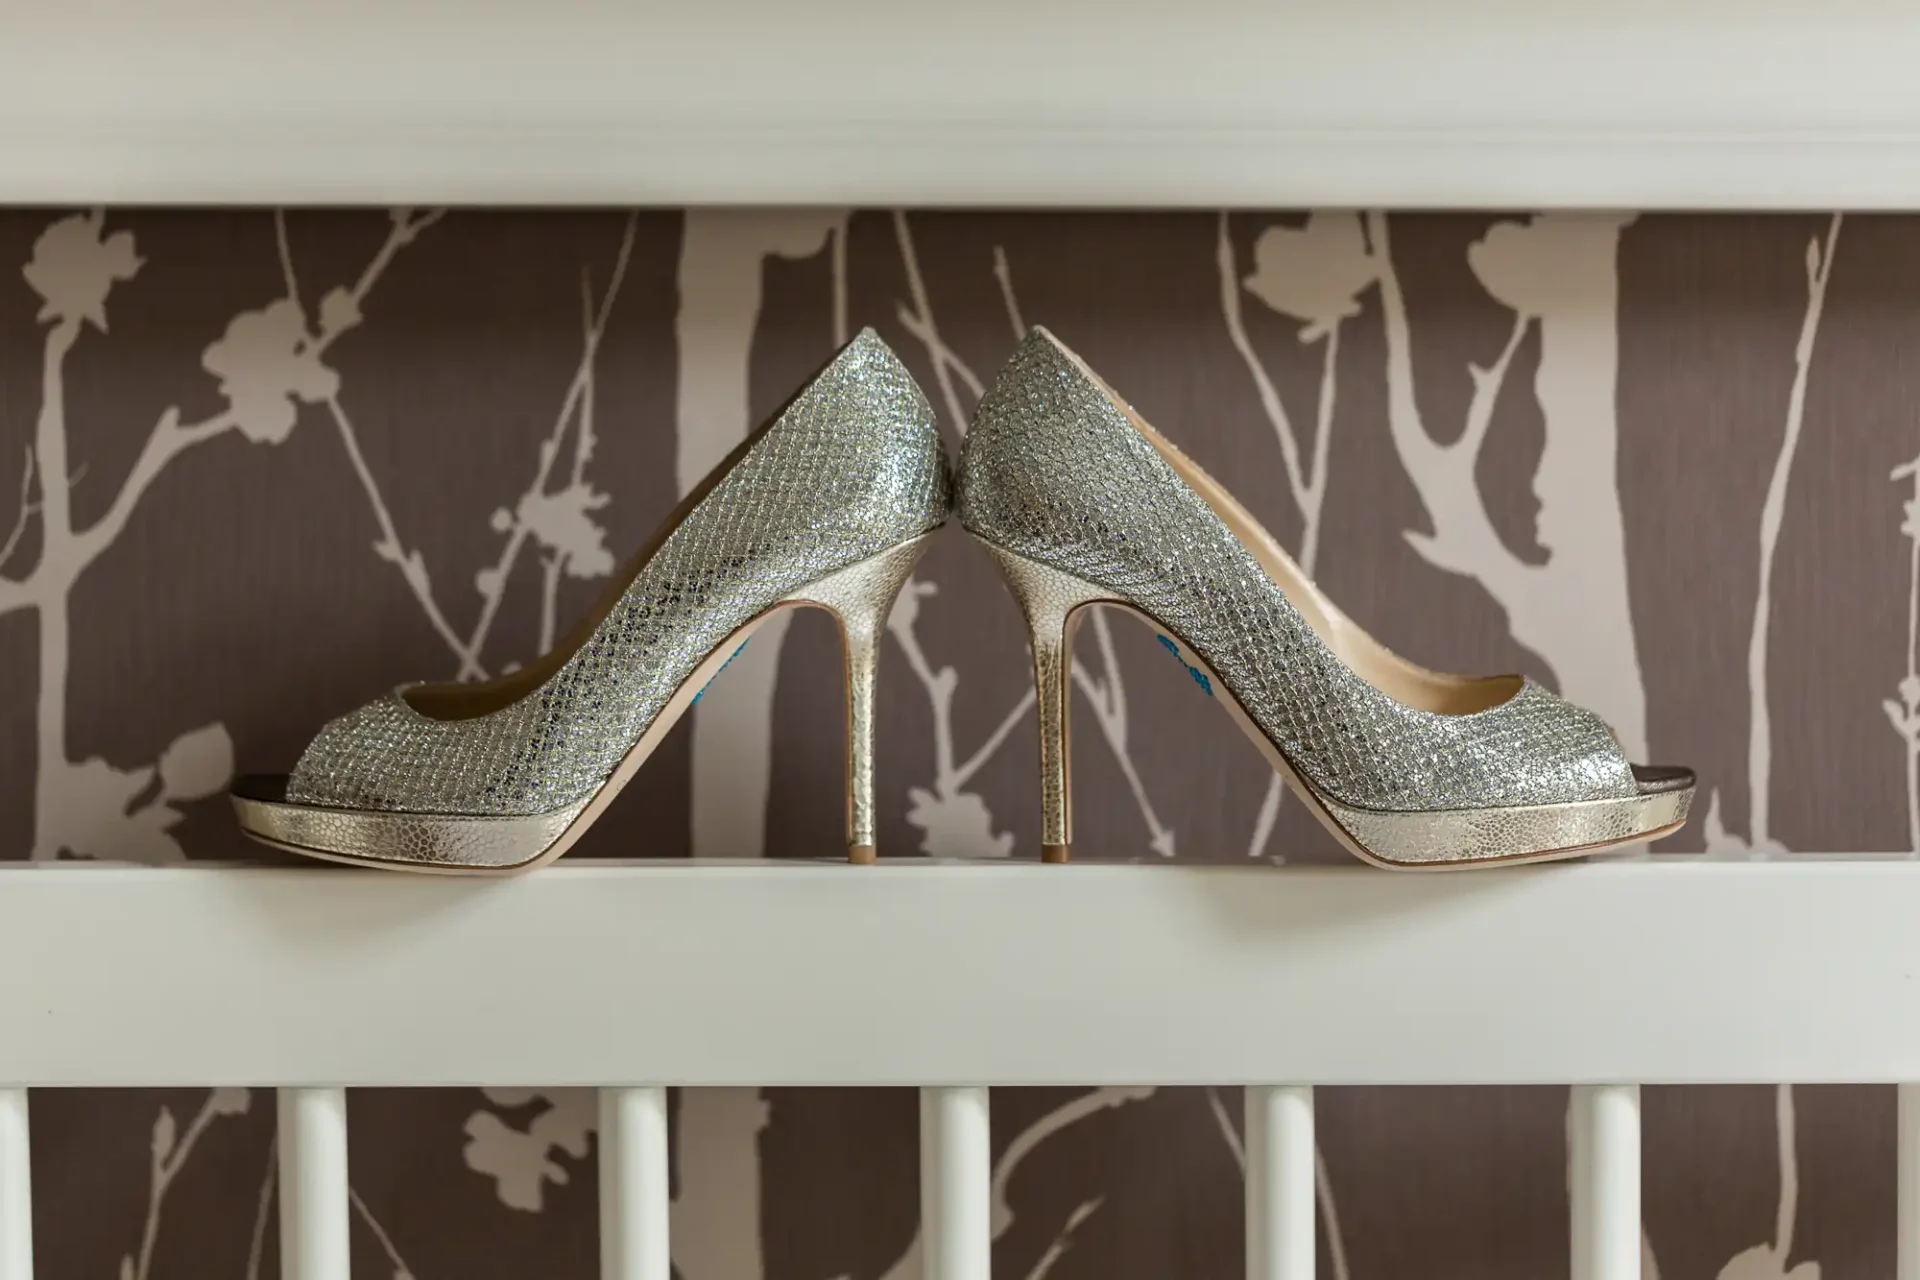 A pair of glittery silver high-heeled shoes displayed on a white railing against a patterned brown wallpaper background.